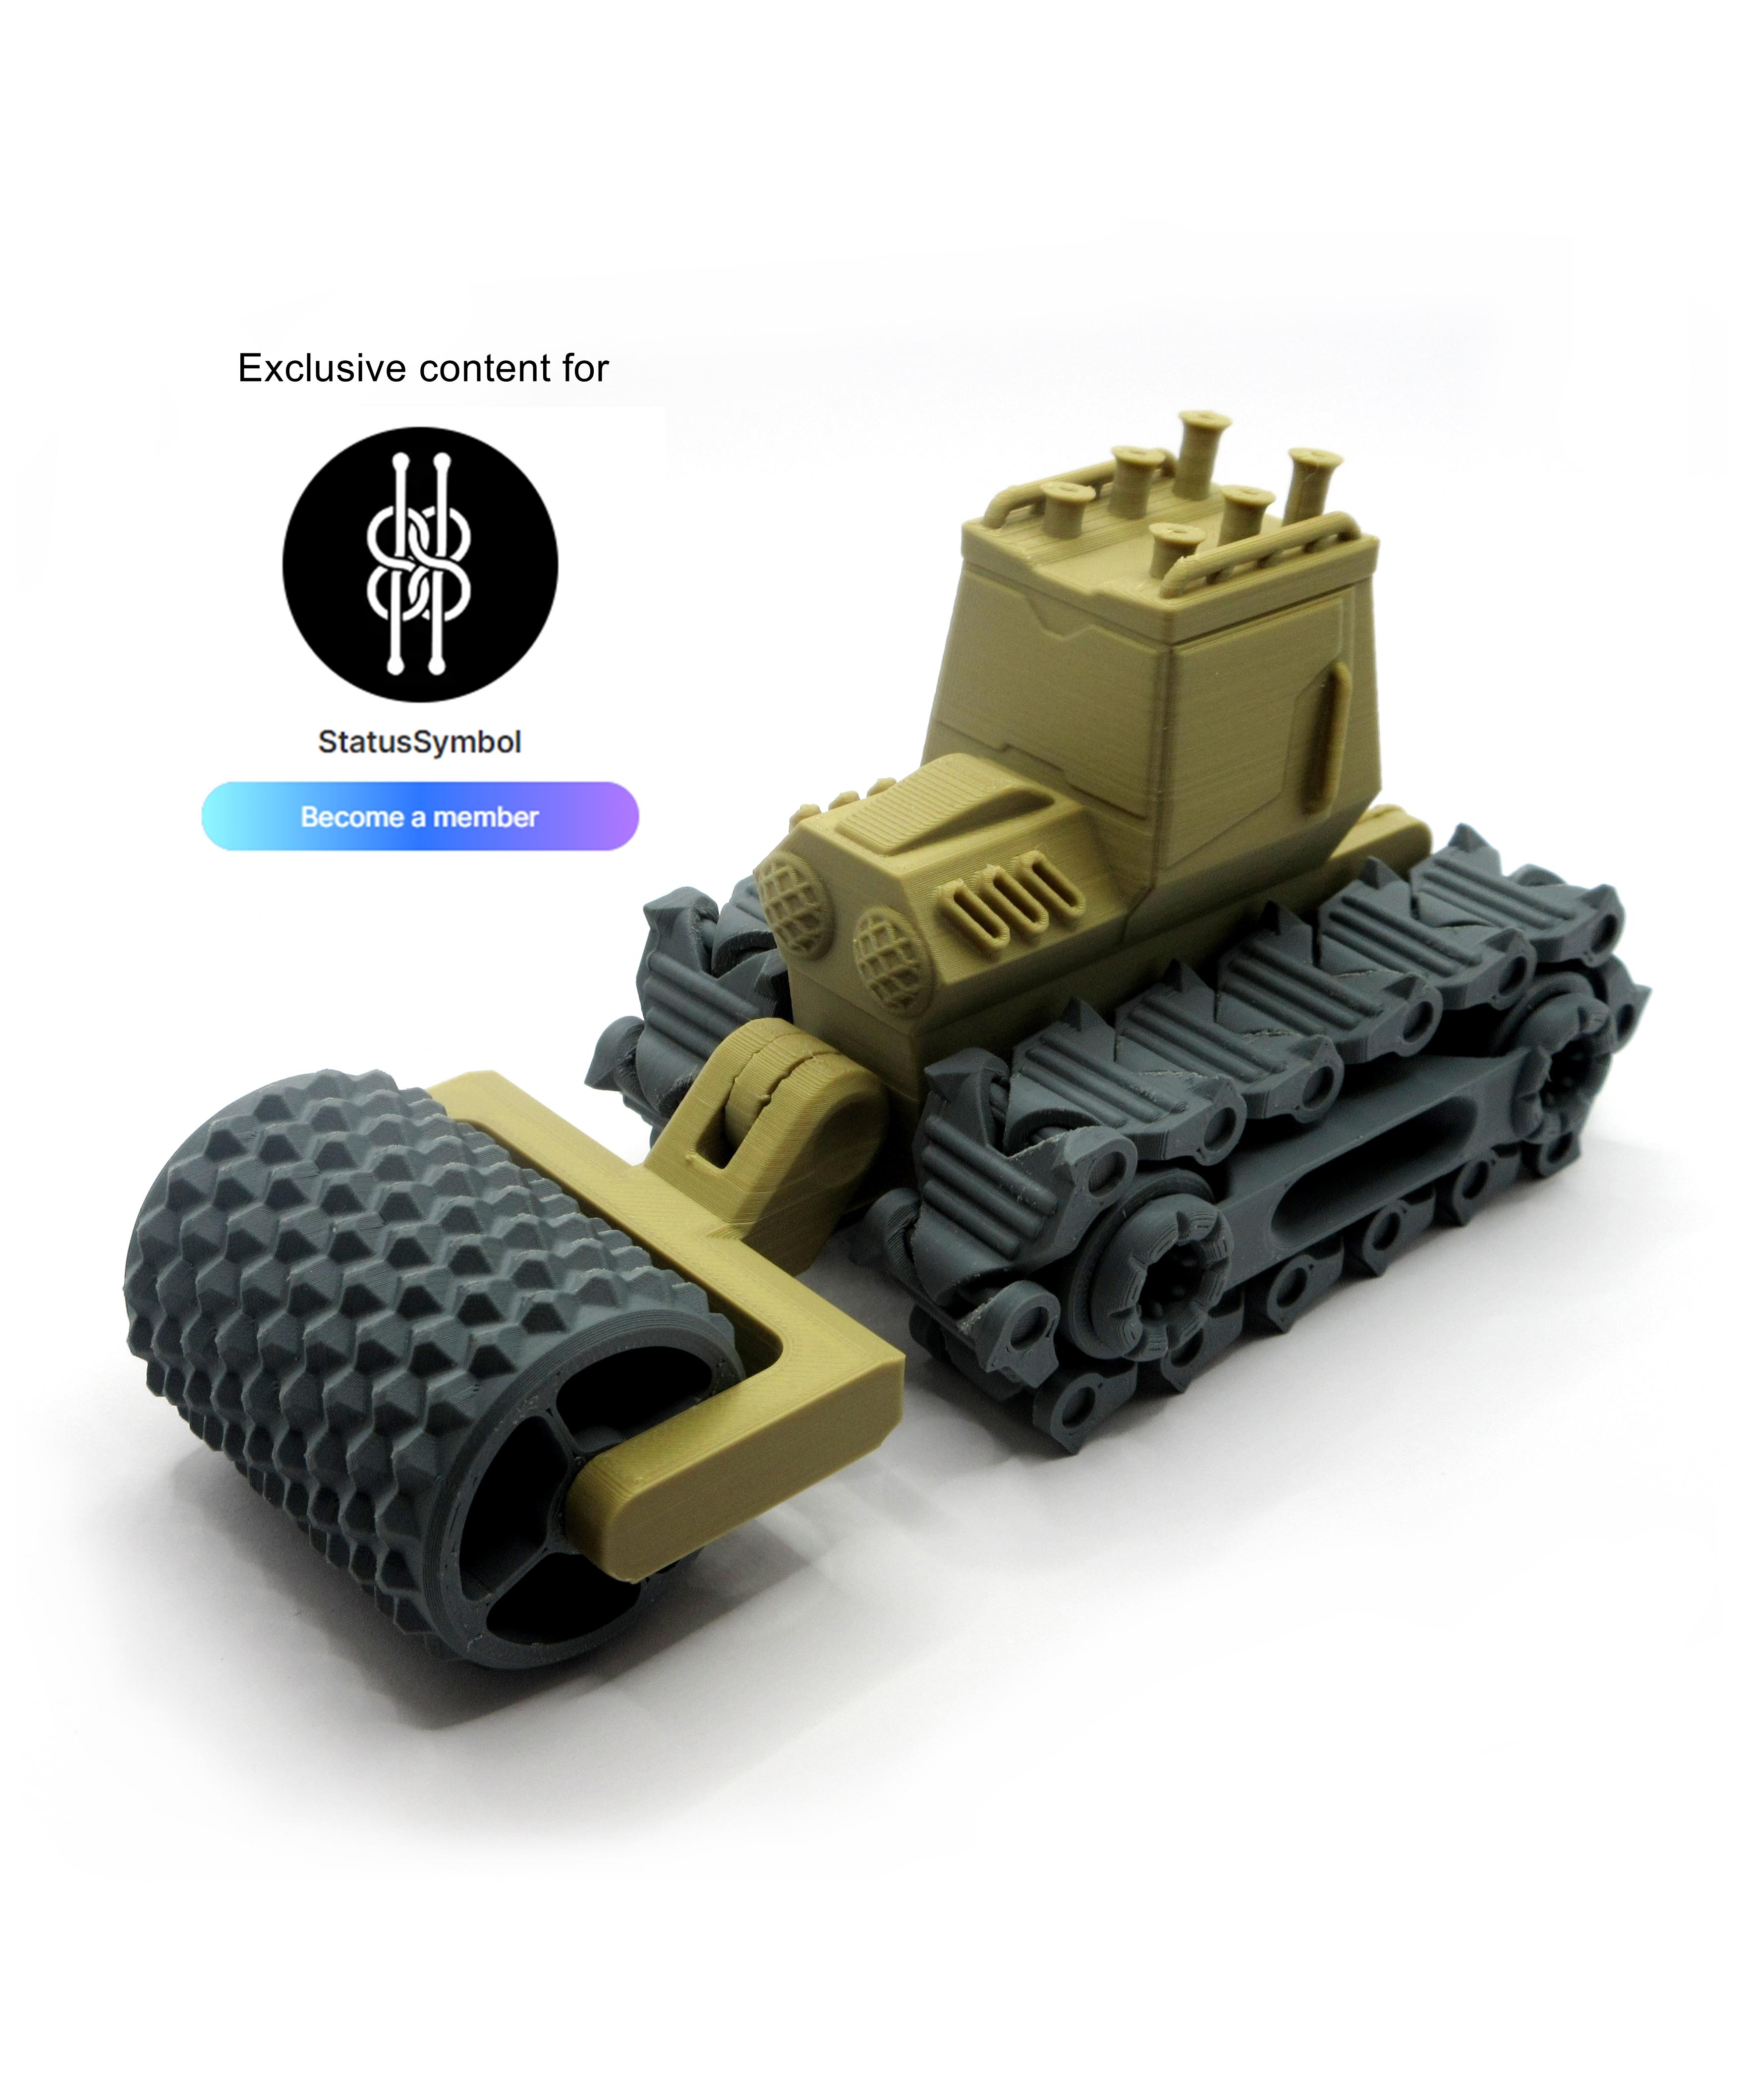 BULLDOZER- TRACKS SUPPORTLESS - EASY ASSEMBLY WITH CLIPS 3d model